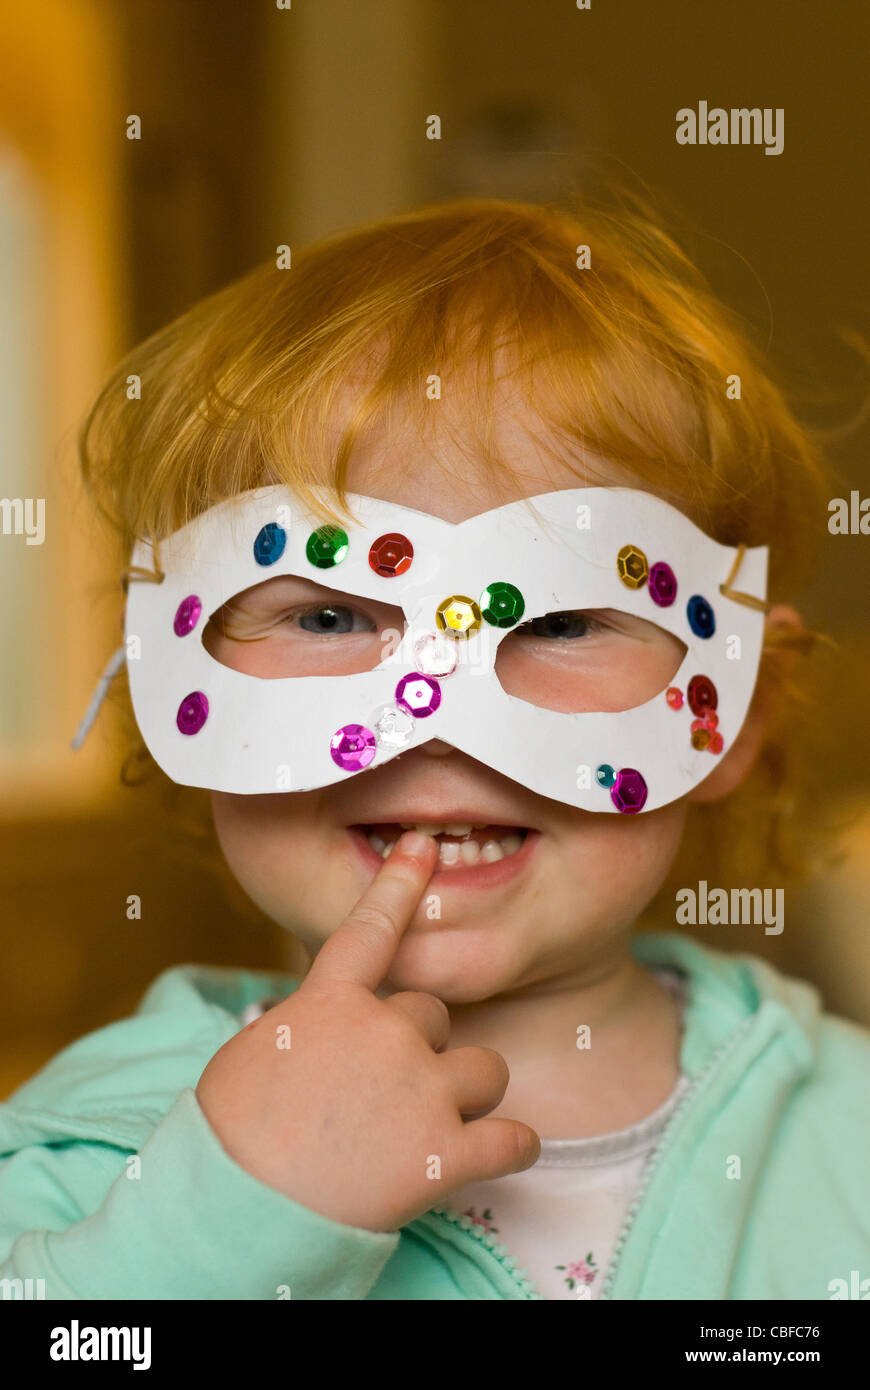 Children playing - Little girl wearing a homemade mask Stock Photo